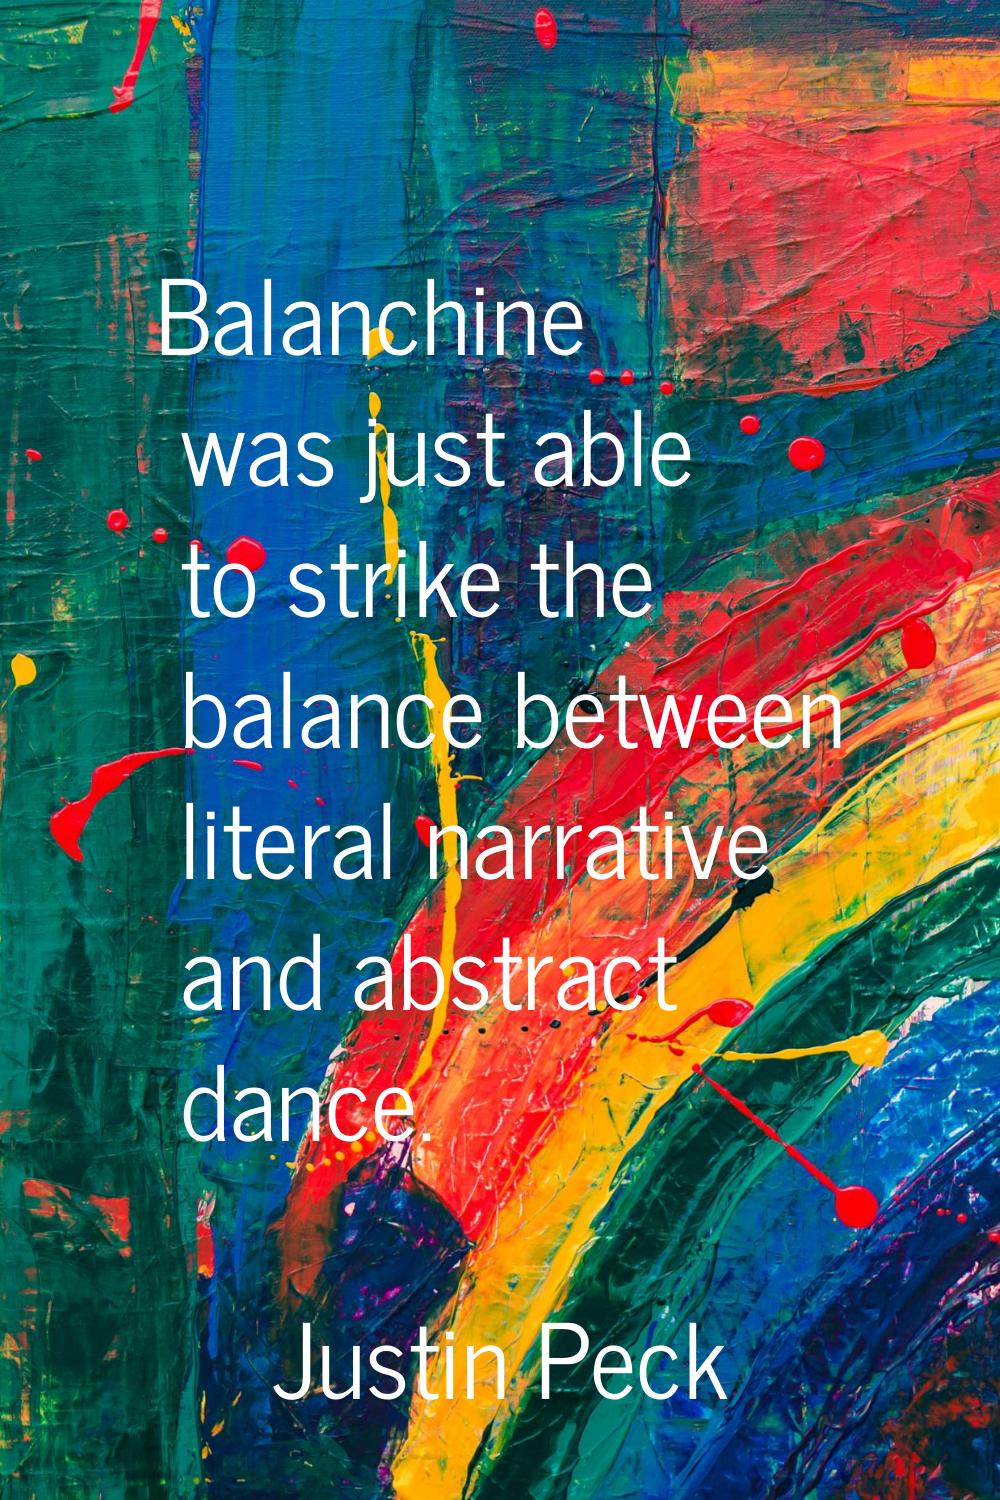 Balanchine was just able to strike the balance between literal narrative and abstract dance.